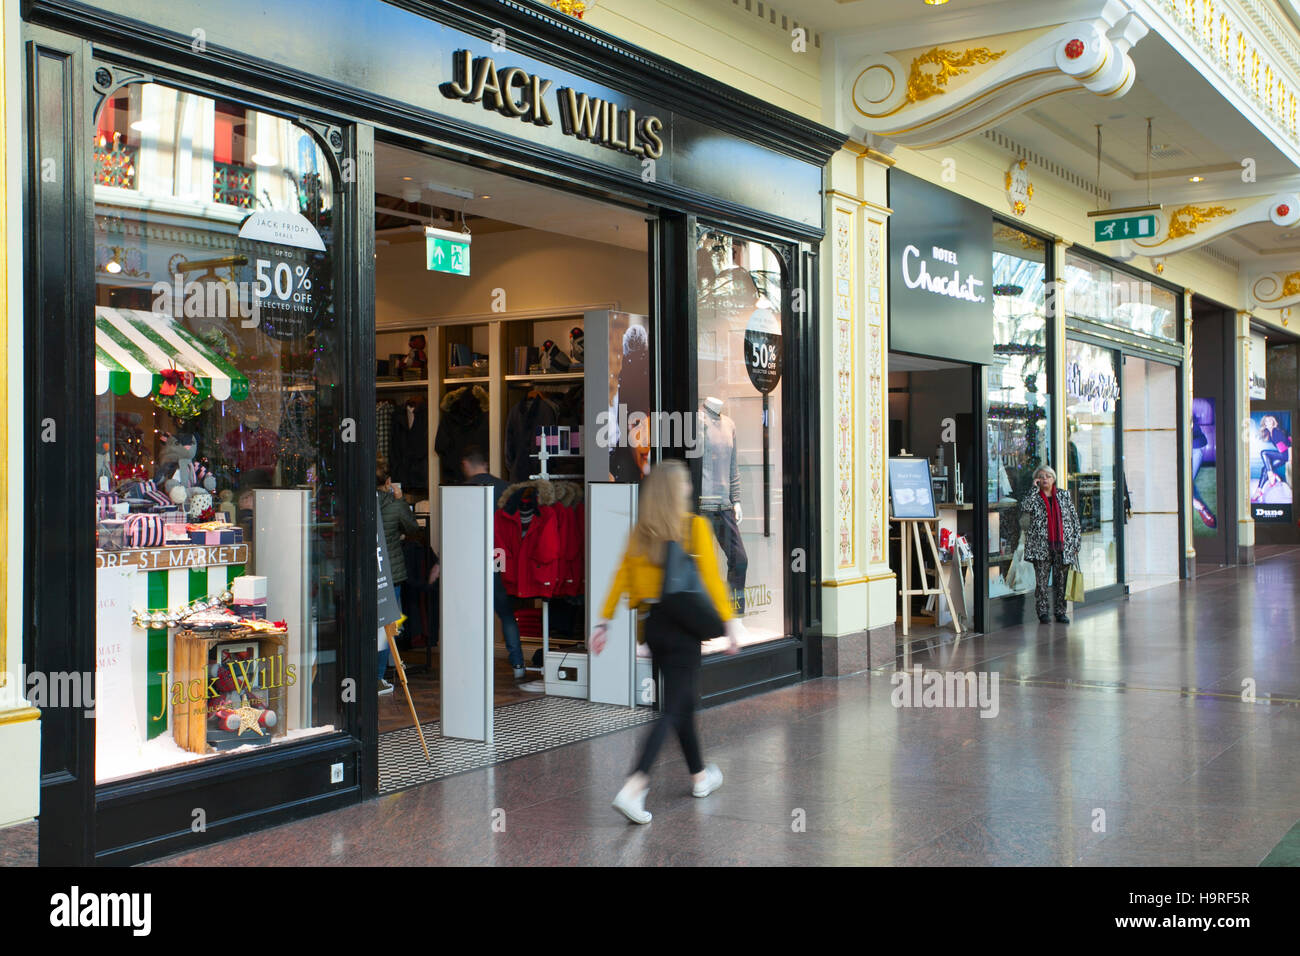 Jack Wills store in the INTU Trafford Centre Manchester. UK 25th November,  2016. Black Friday Sales Weekend at Jack Wills. City centre holiday  shopping season, retail shops, stores, Christmas shoppers, people discount